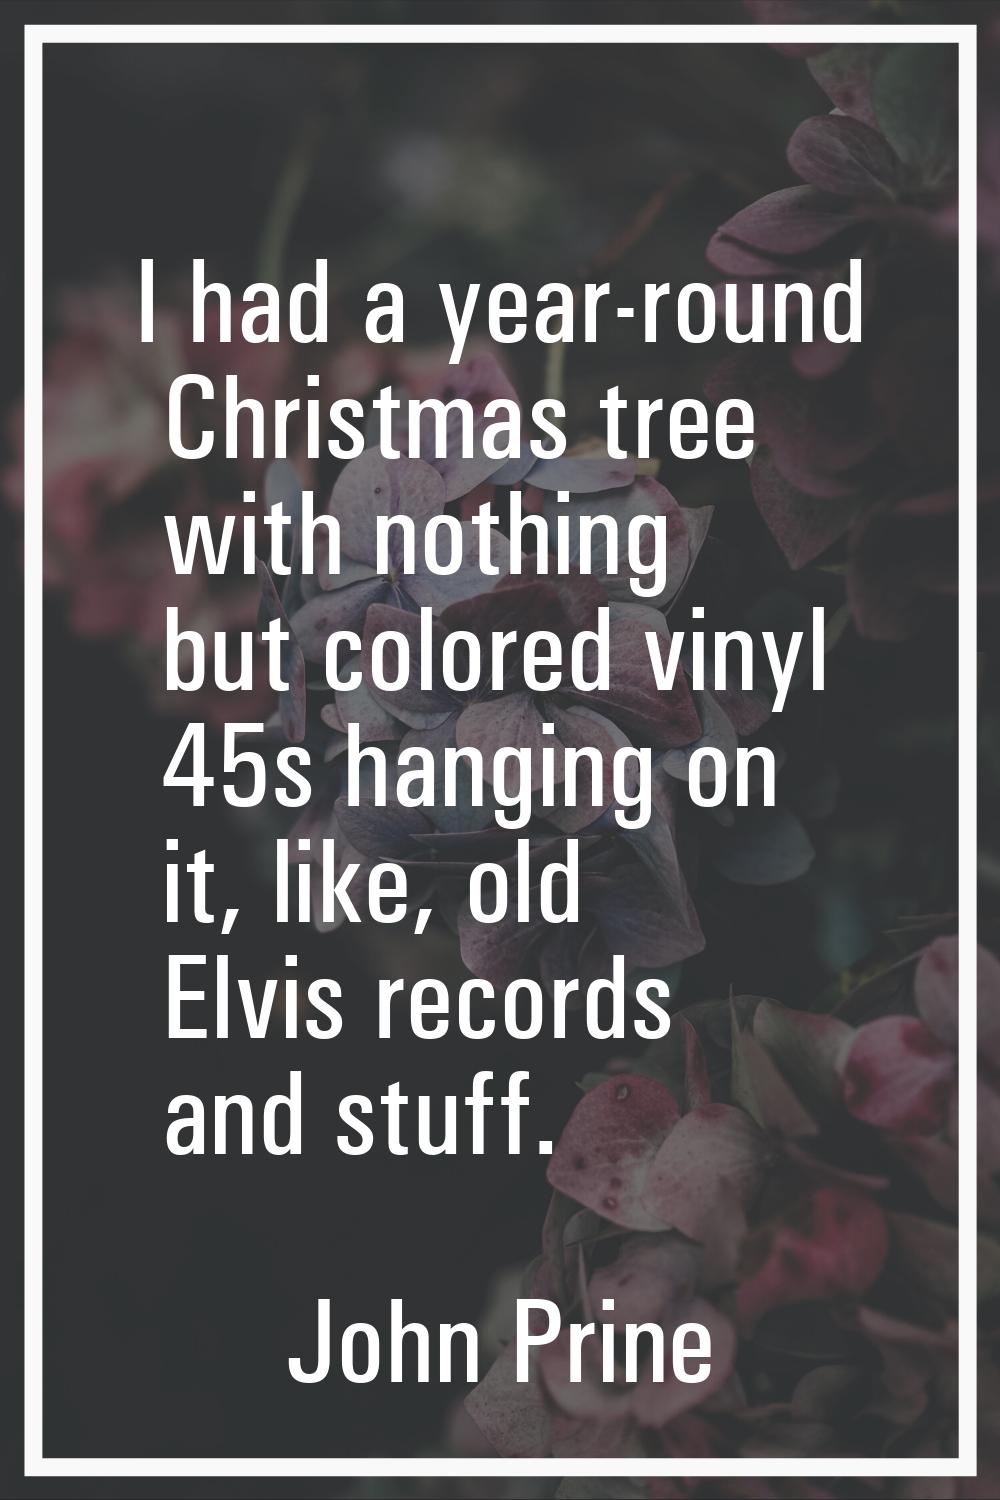 I had a year-round Christmas tree with nothing but colored vinyl 45s hanging on it, like, old Elvis